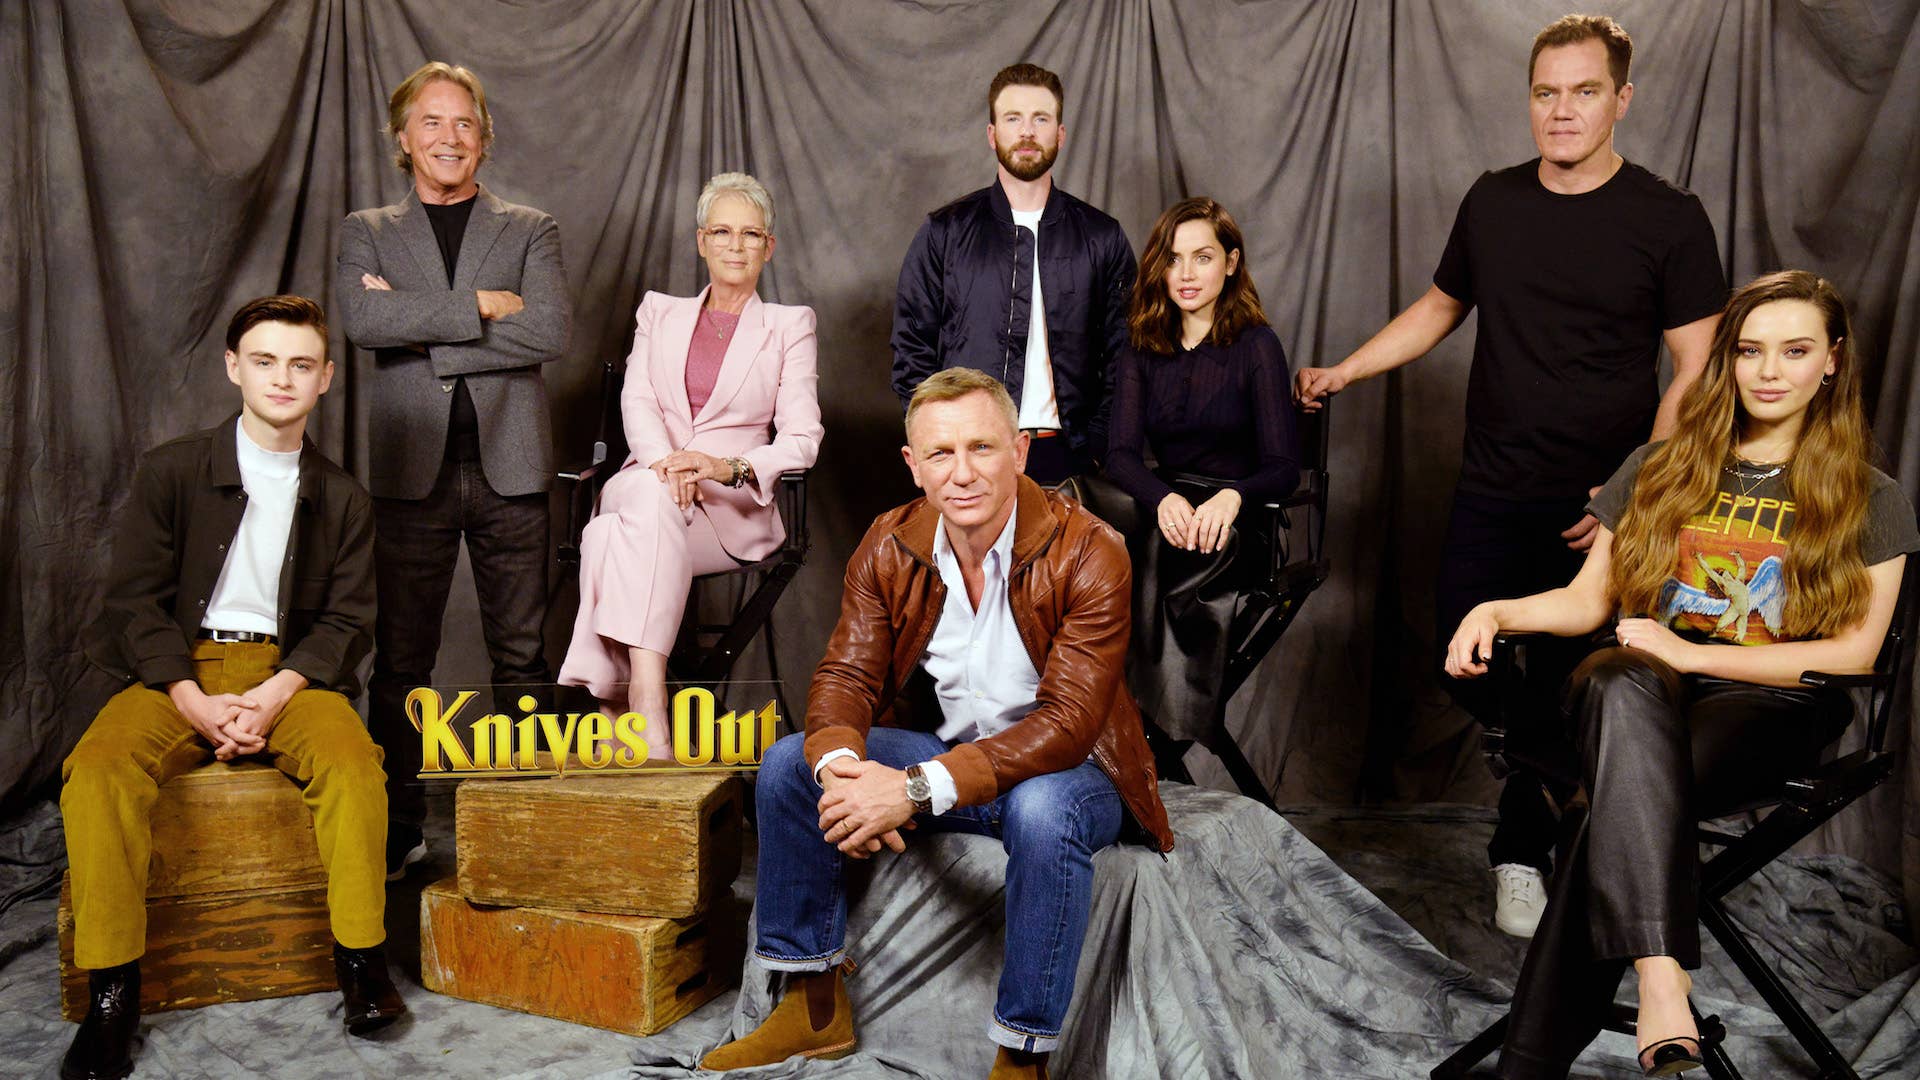 "Knives Out" cast attends photocall.